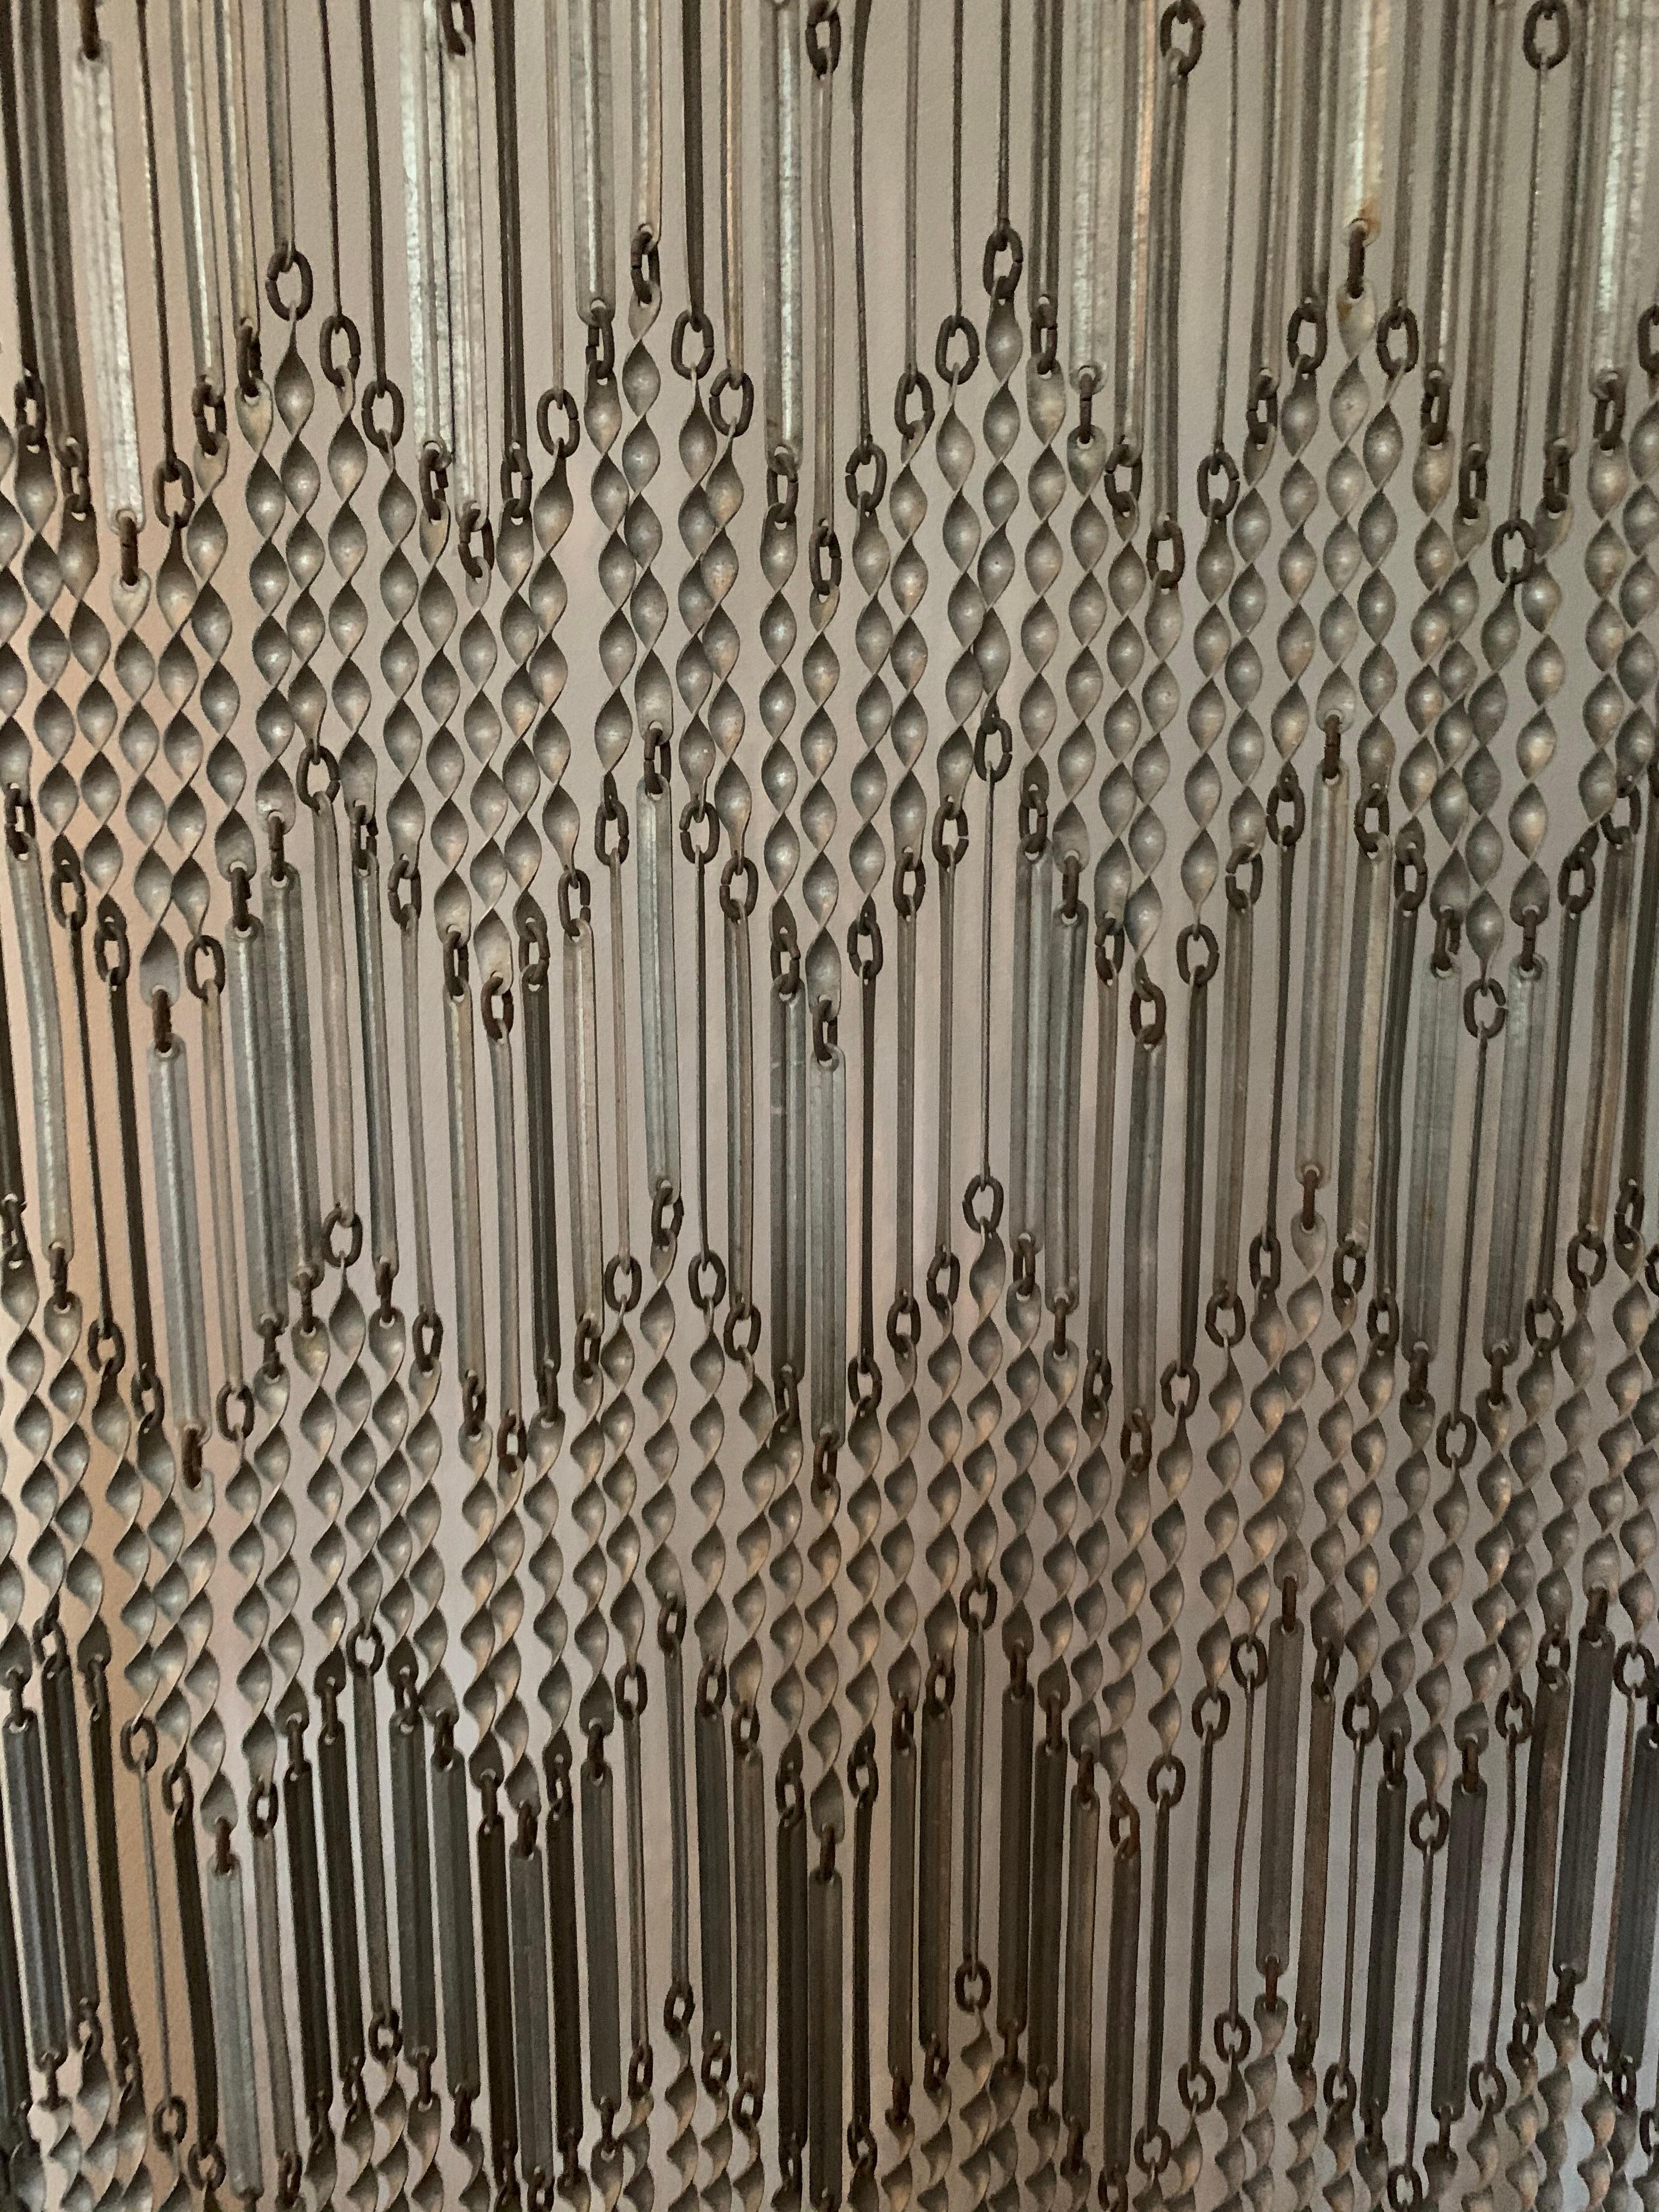 French early 20th century decorative screen. Custom made wood framed metal screen with geometric repeating pattern from top to bottom. Can be used as a partition or room divider.

Property from esteemed interior designer Juan Montoya. Juan Montoya